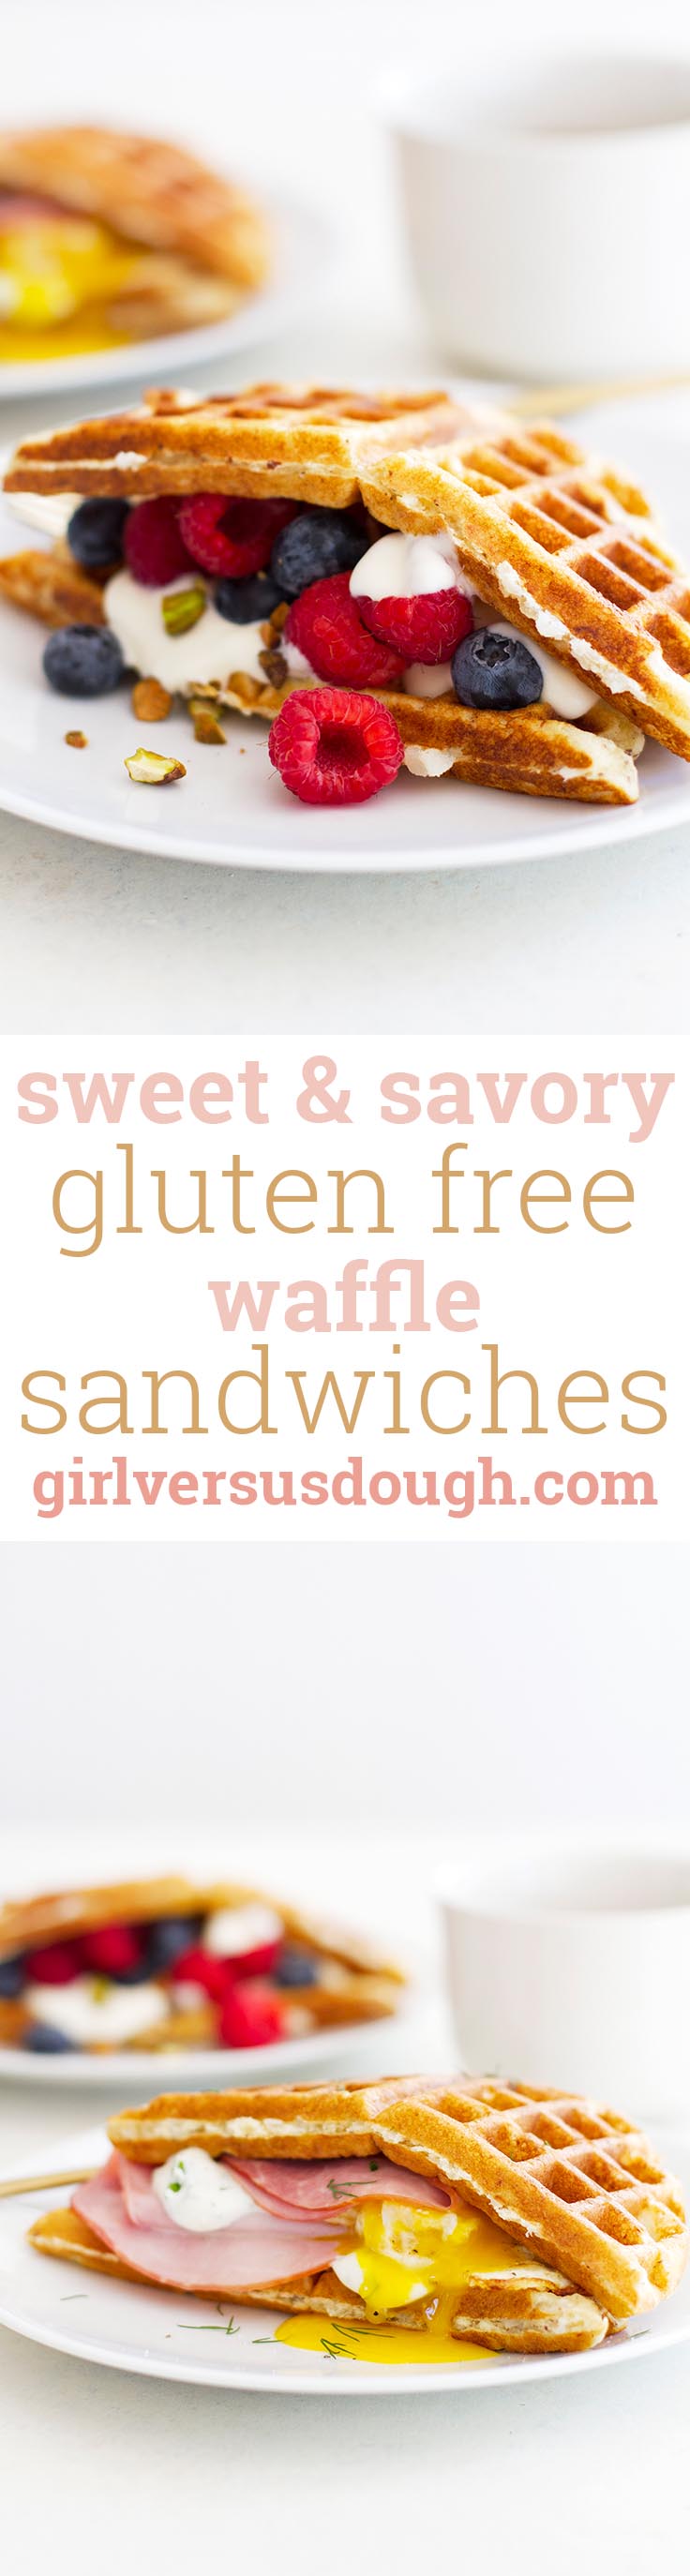 Sweet and Savory Gluten Free Waffle Breakfast Sandwiches -- Hash brown-loaded gluten free waffles topped with sweet or savory toppings; perfect for brunch! girlversusdough.com @girlversusdough